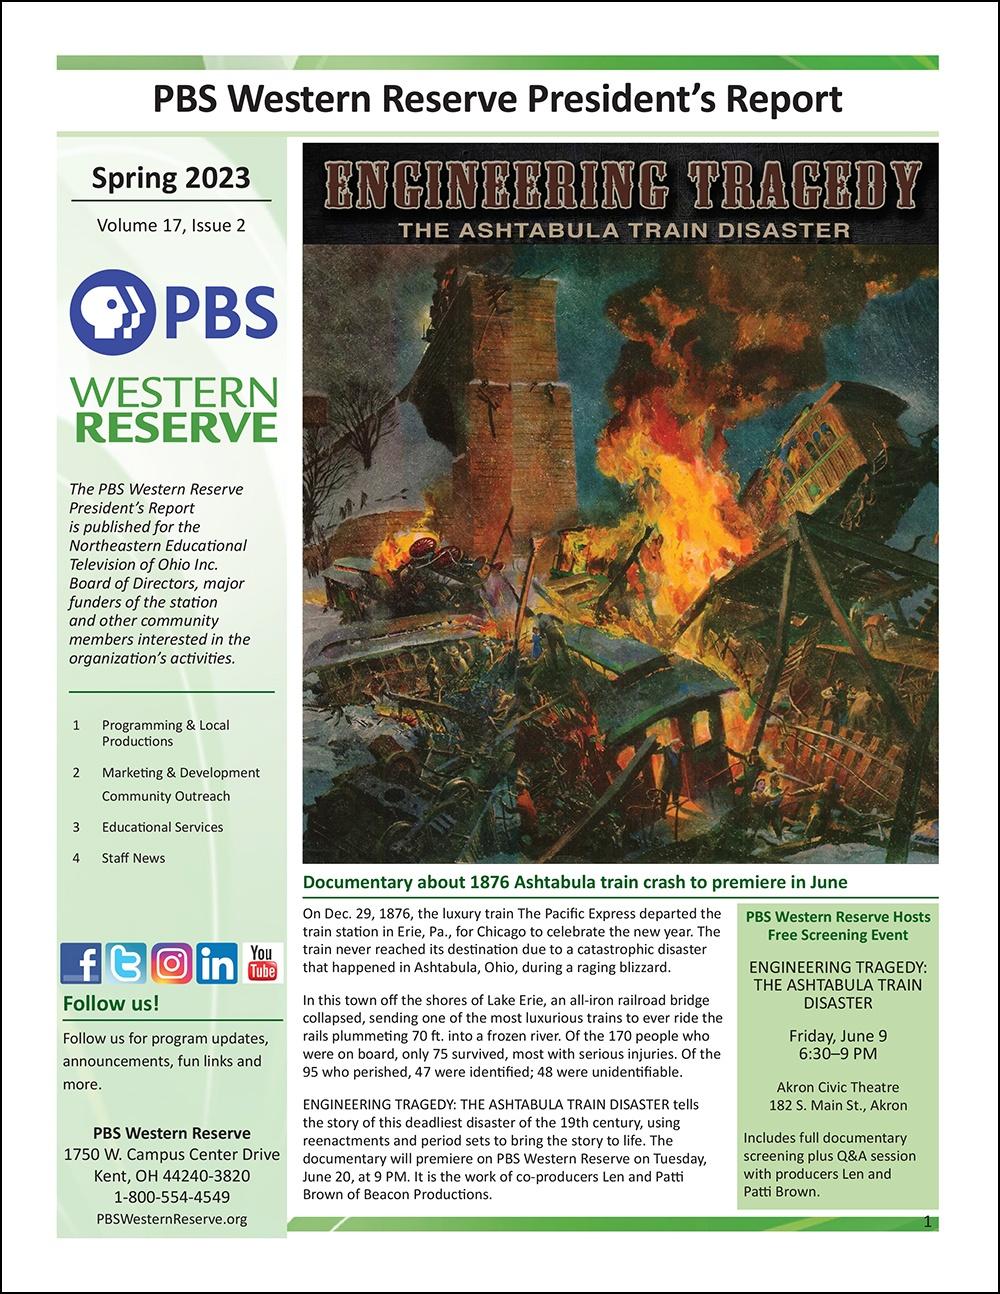 PBS Western Reserve President's Report - Spring 2023